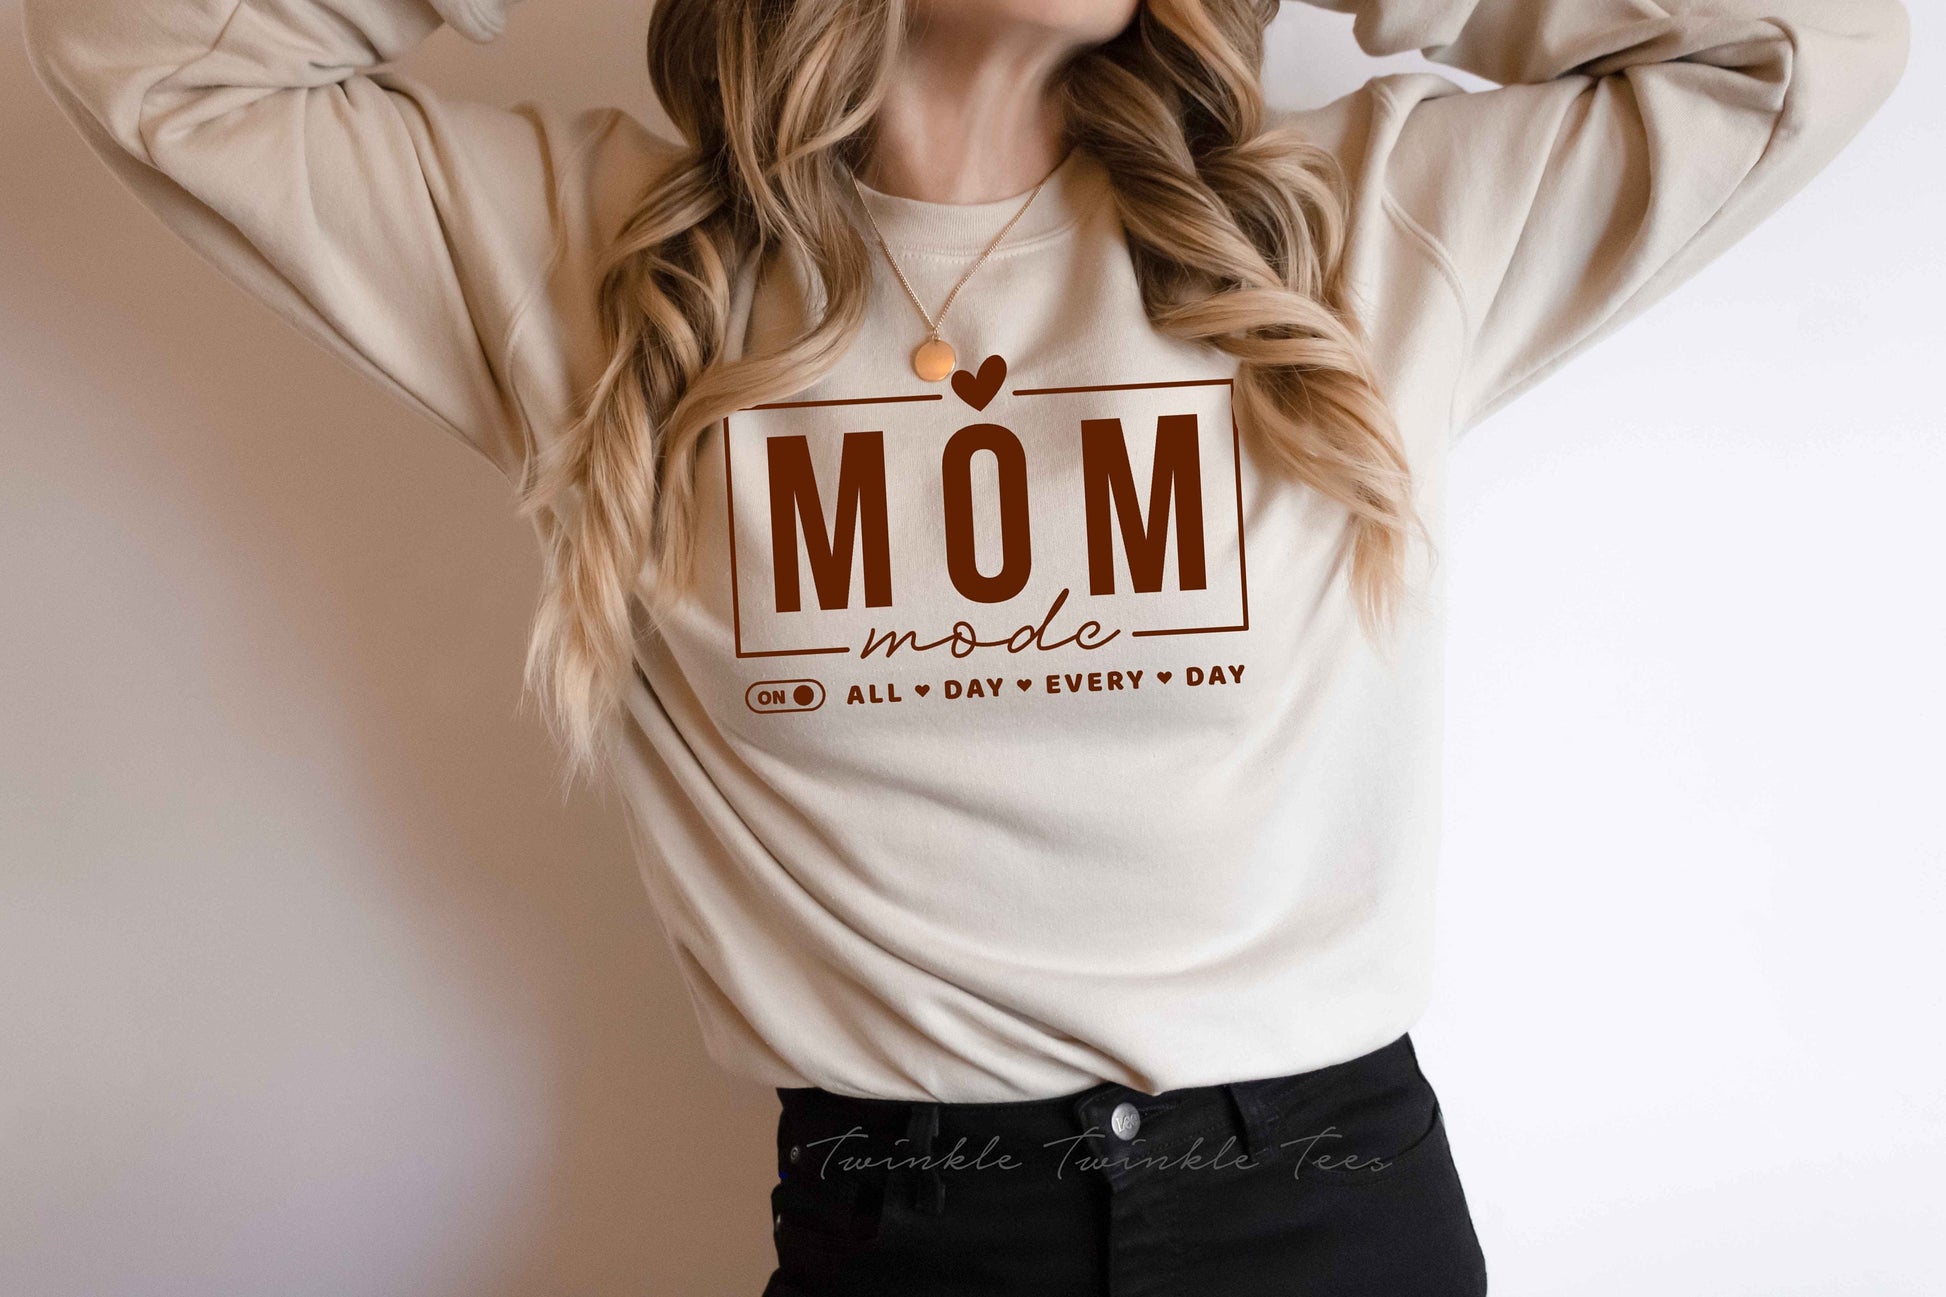 Mom Mode On All Day Every Day fleece sweatshirt - funny sweatshirt - shirt for mom - mother's day sweatshirt